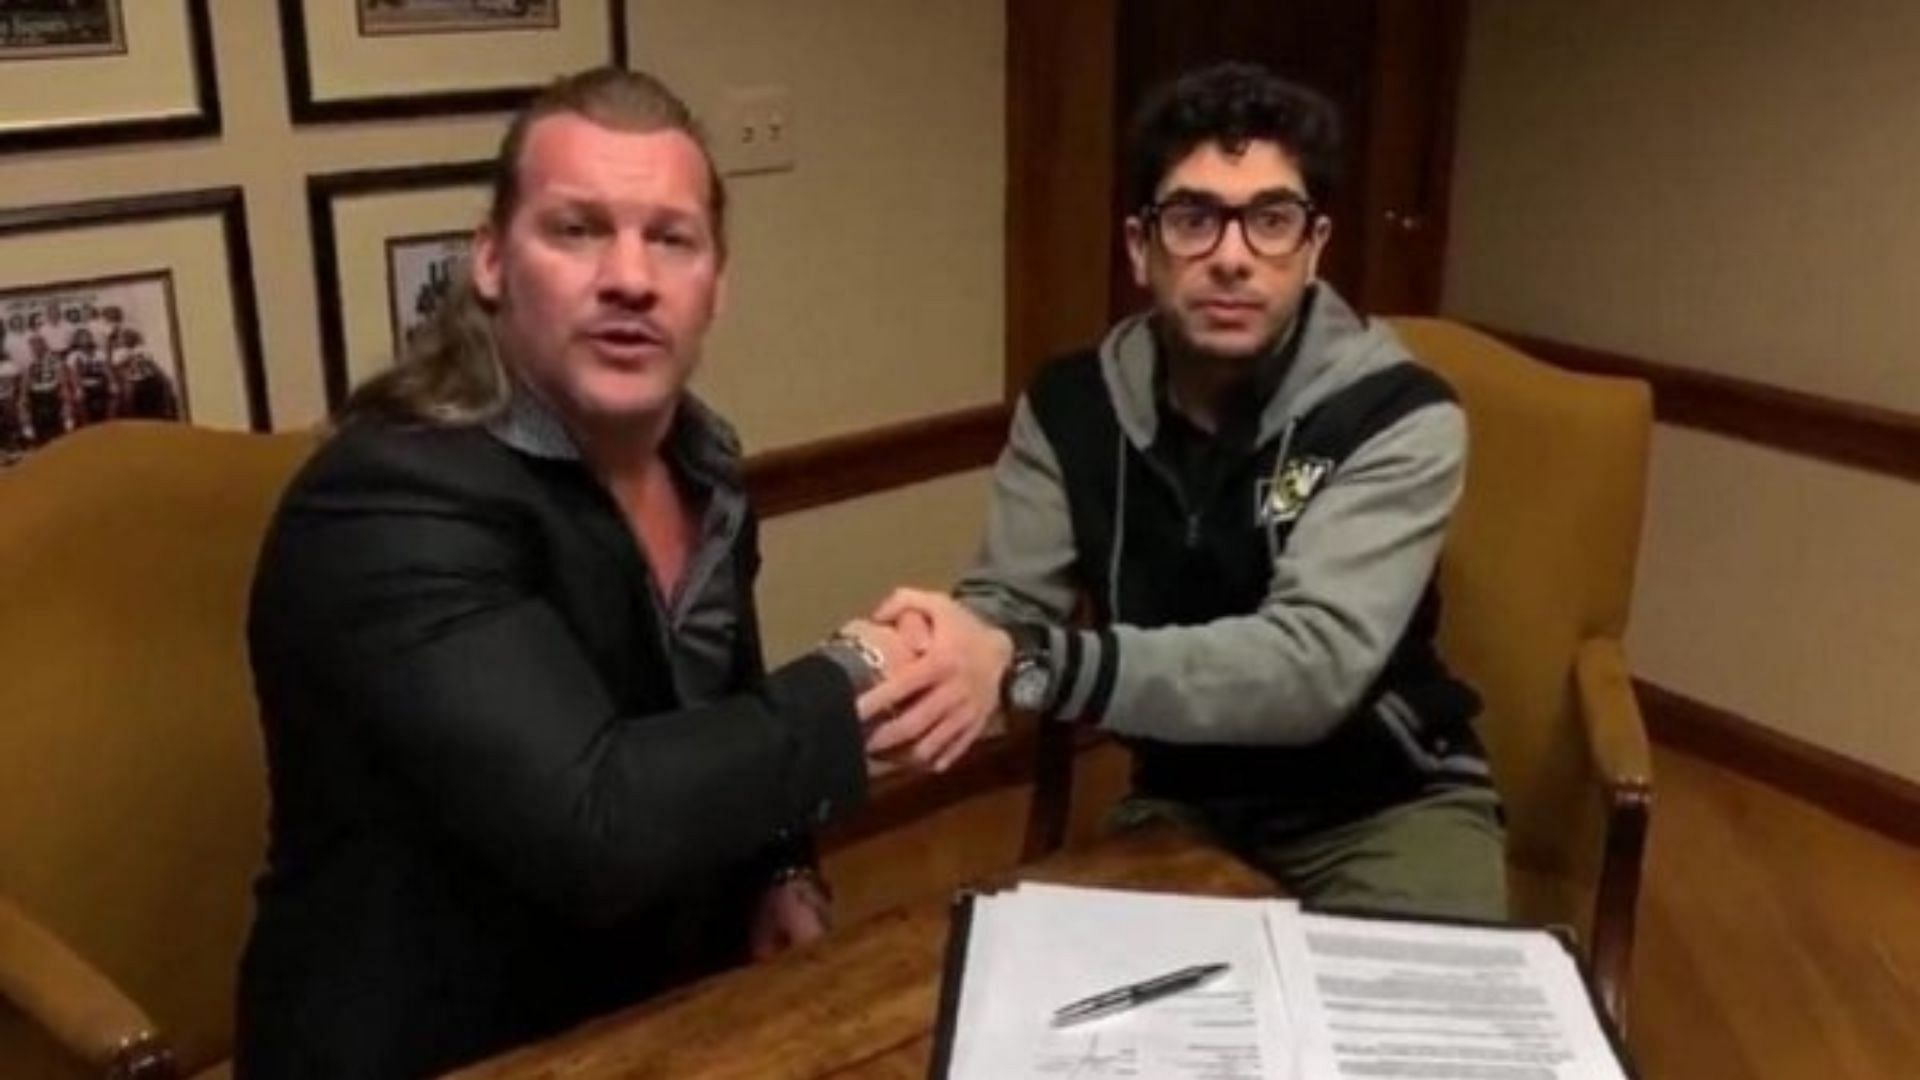 Chris Jericho was one of the initial signings in AEW